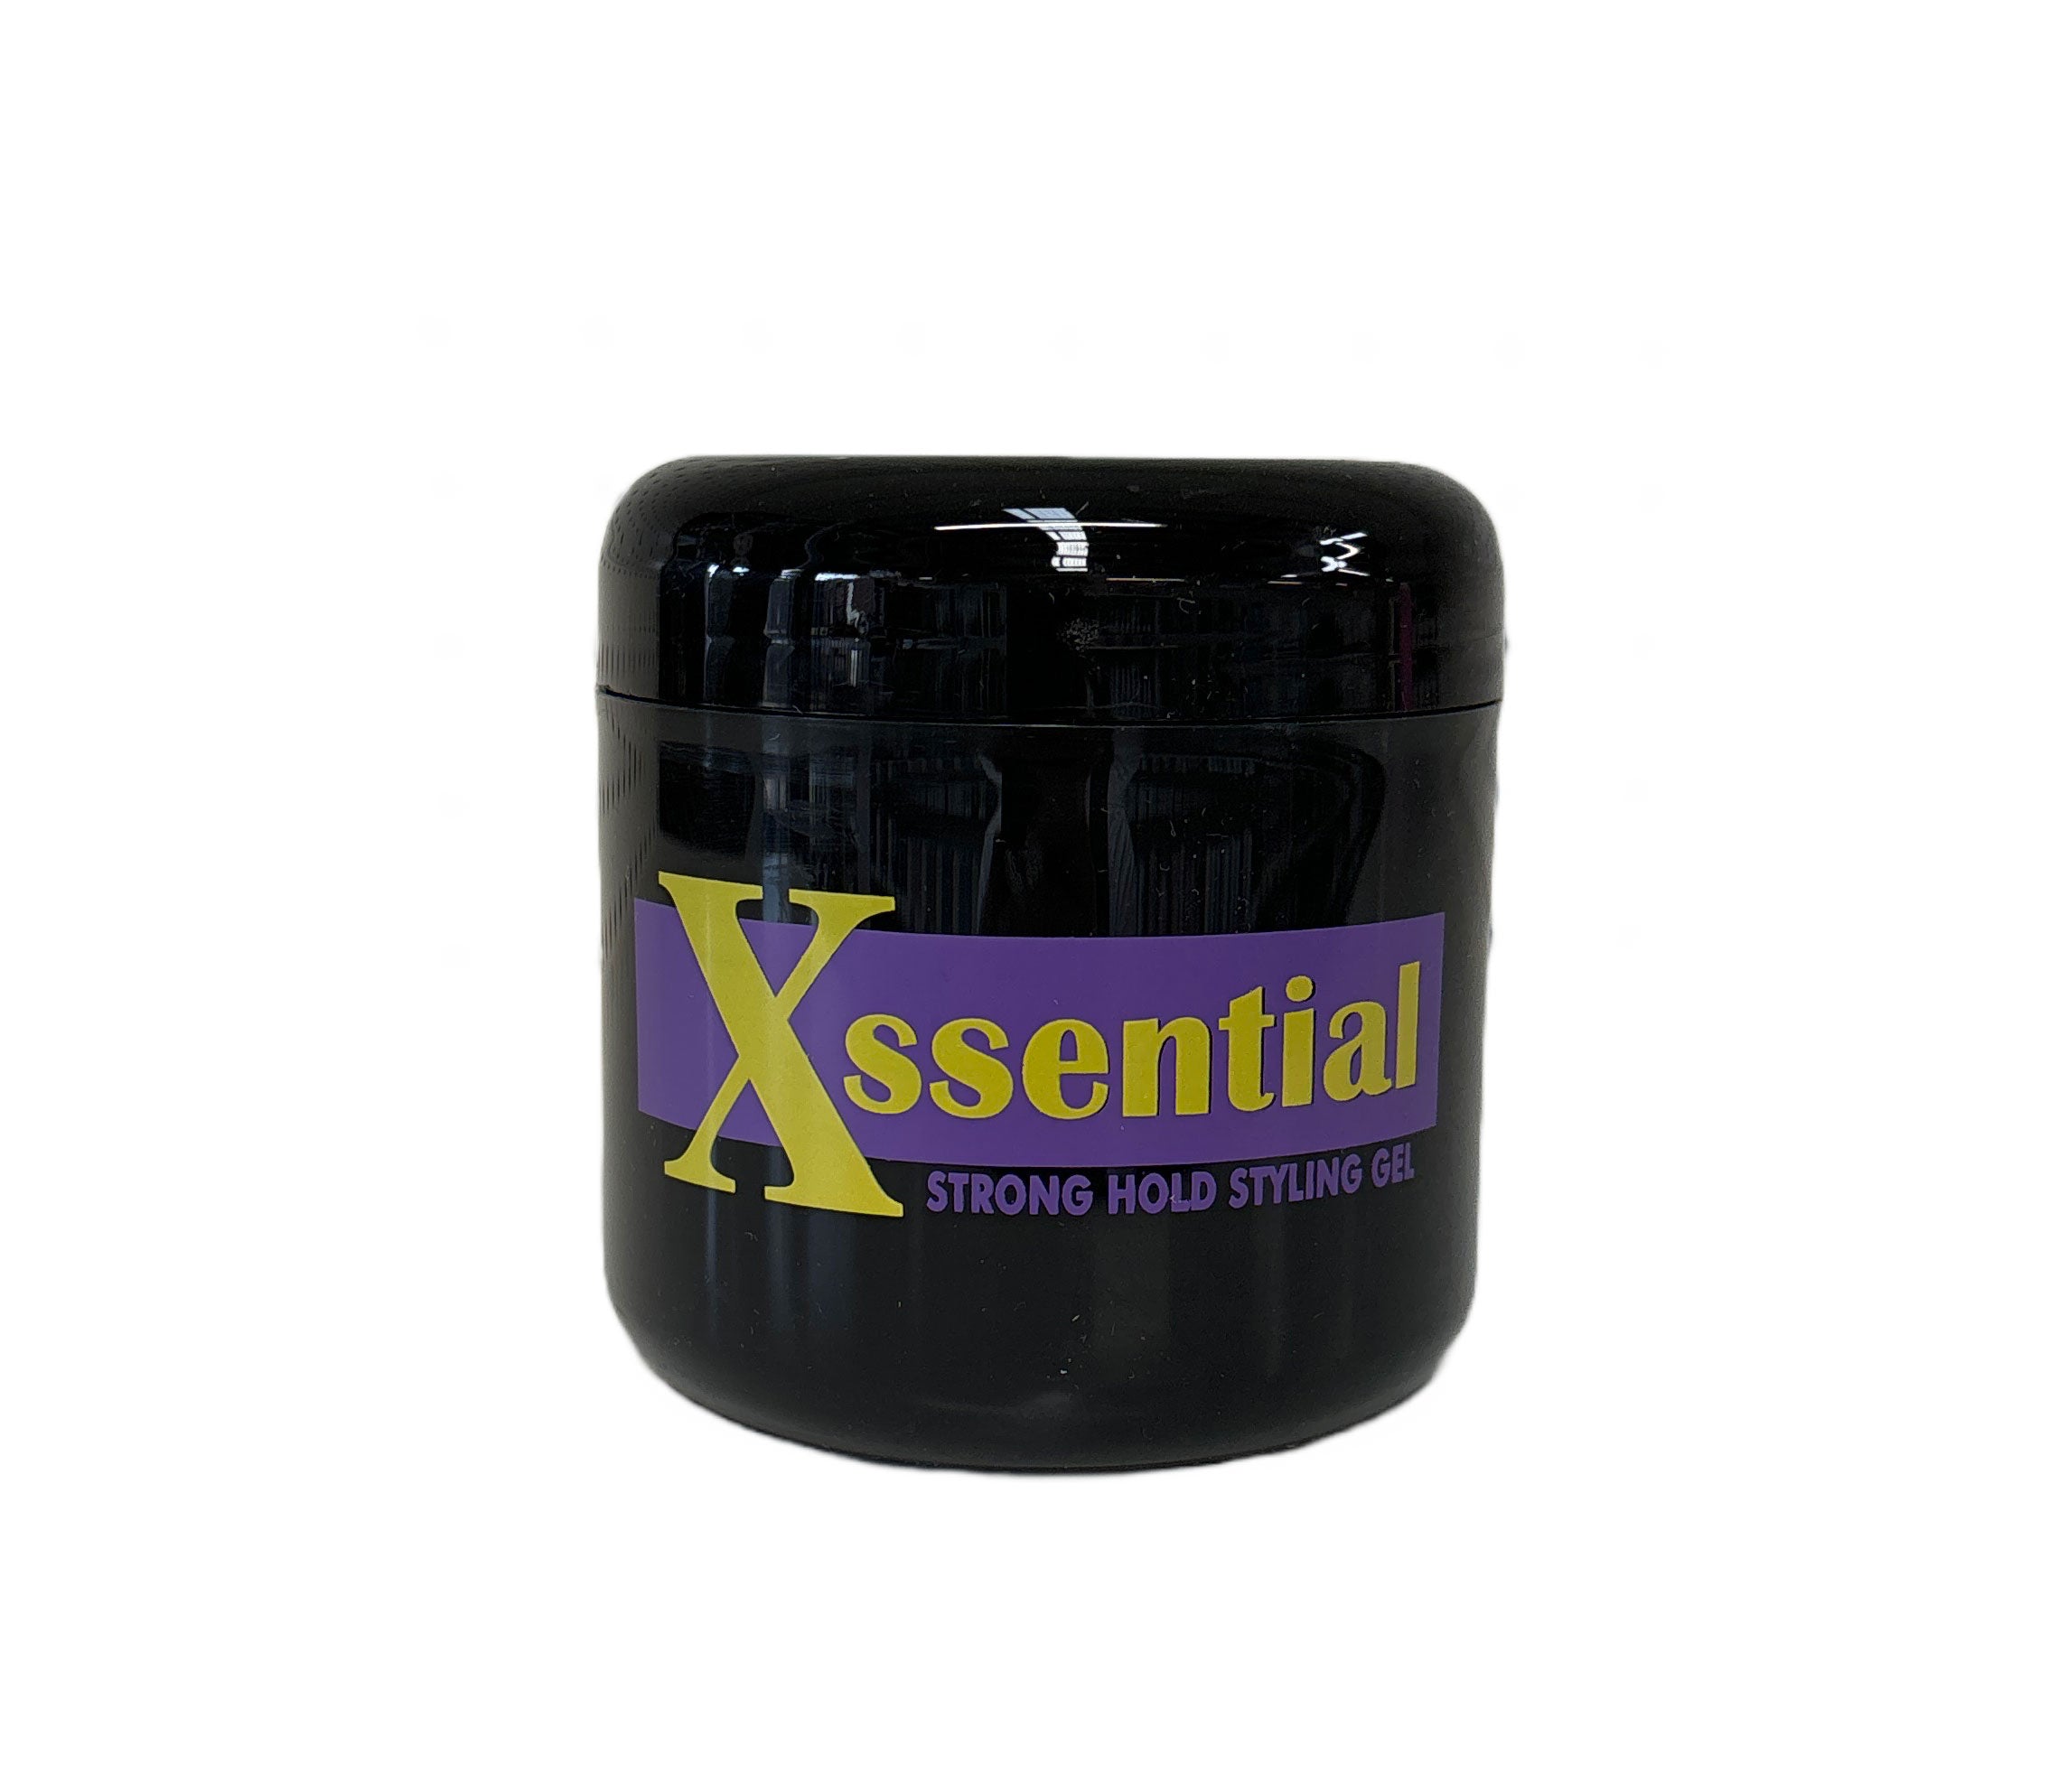 SY Xssential Strong Hold Styling Gel 250g